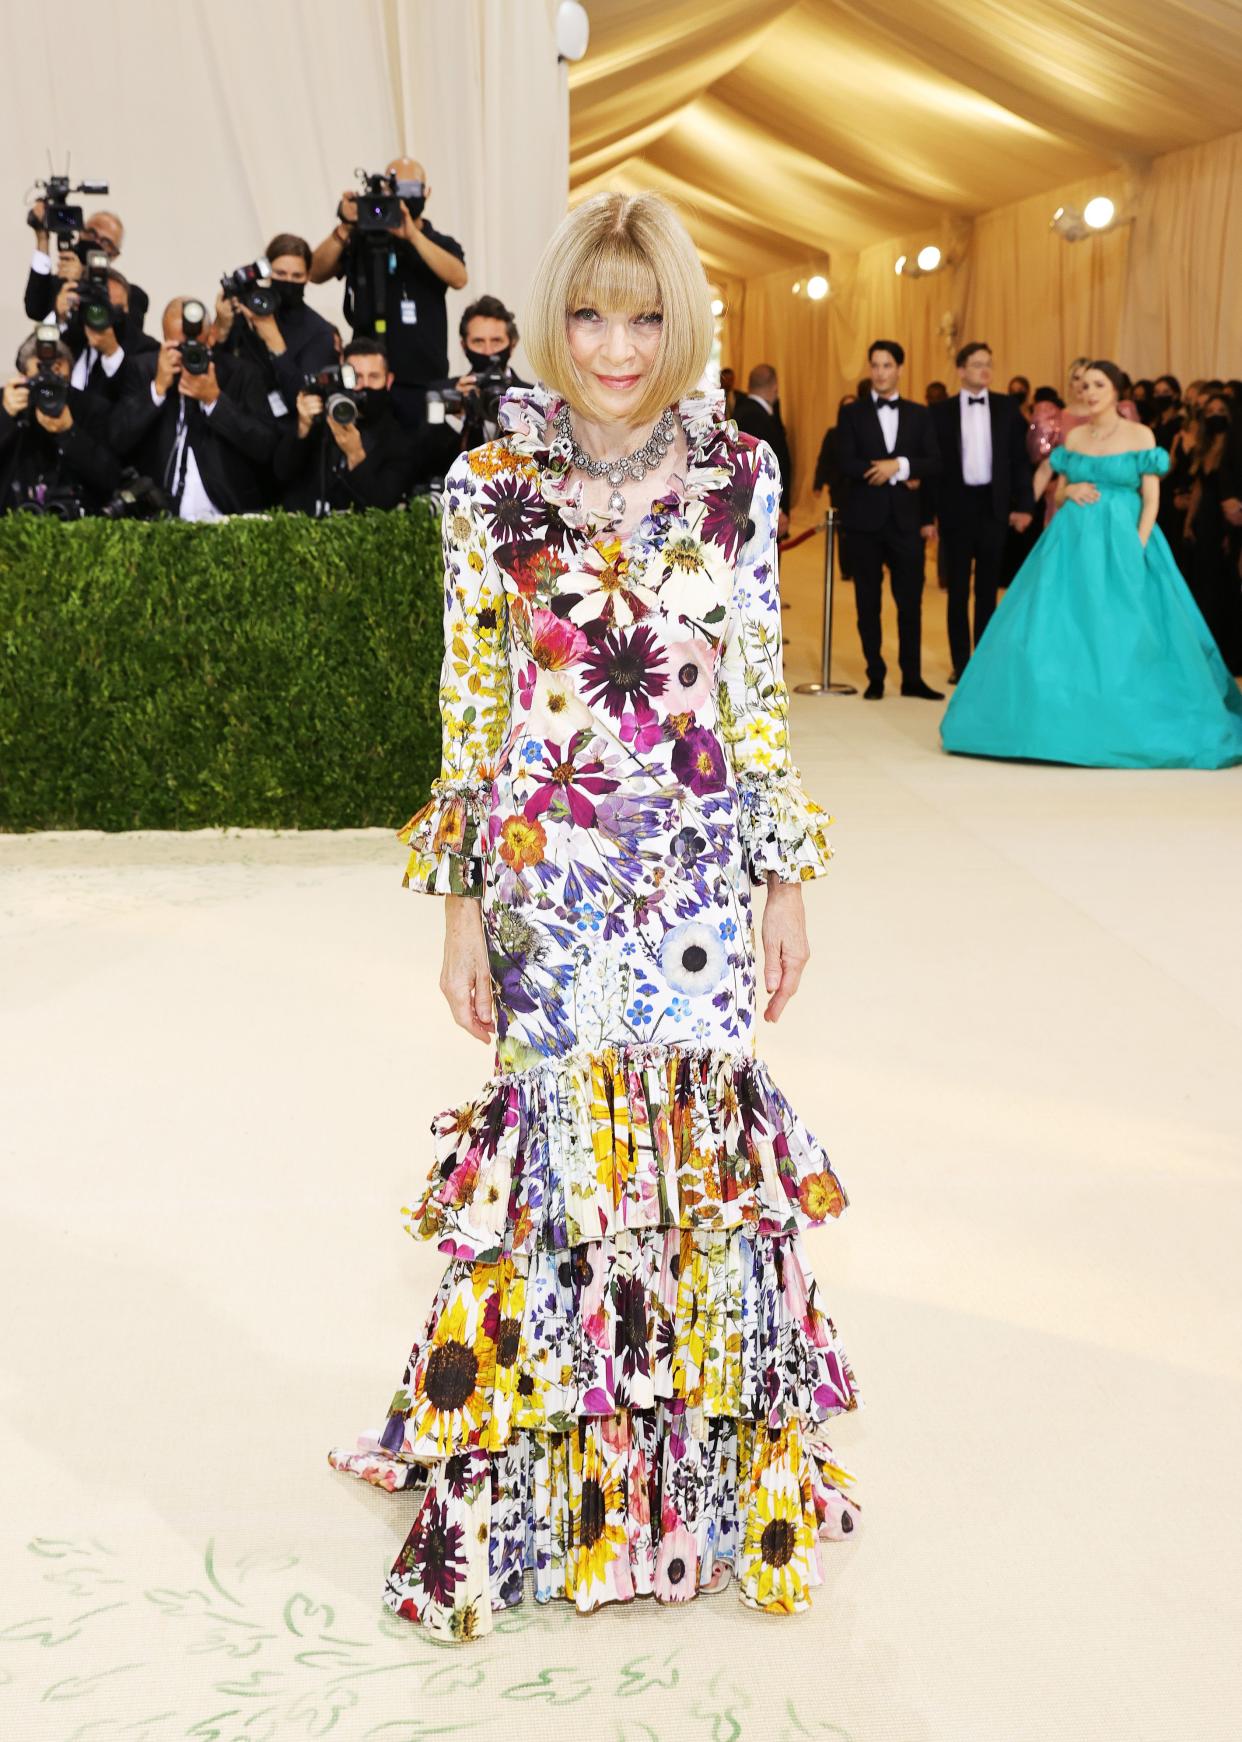 Anna Wintour attends The 2021 Met Gala Celebrating In America: A Lexicon Of Fashion at Metropolitan Museum of Art on Sept. 13, 2021 in New York.